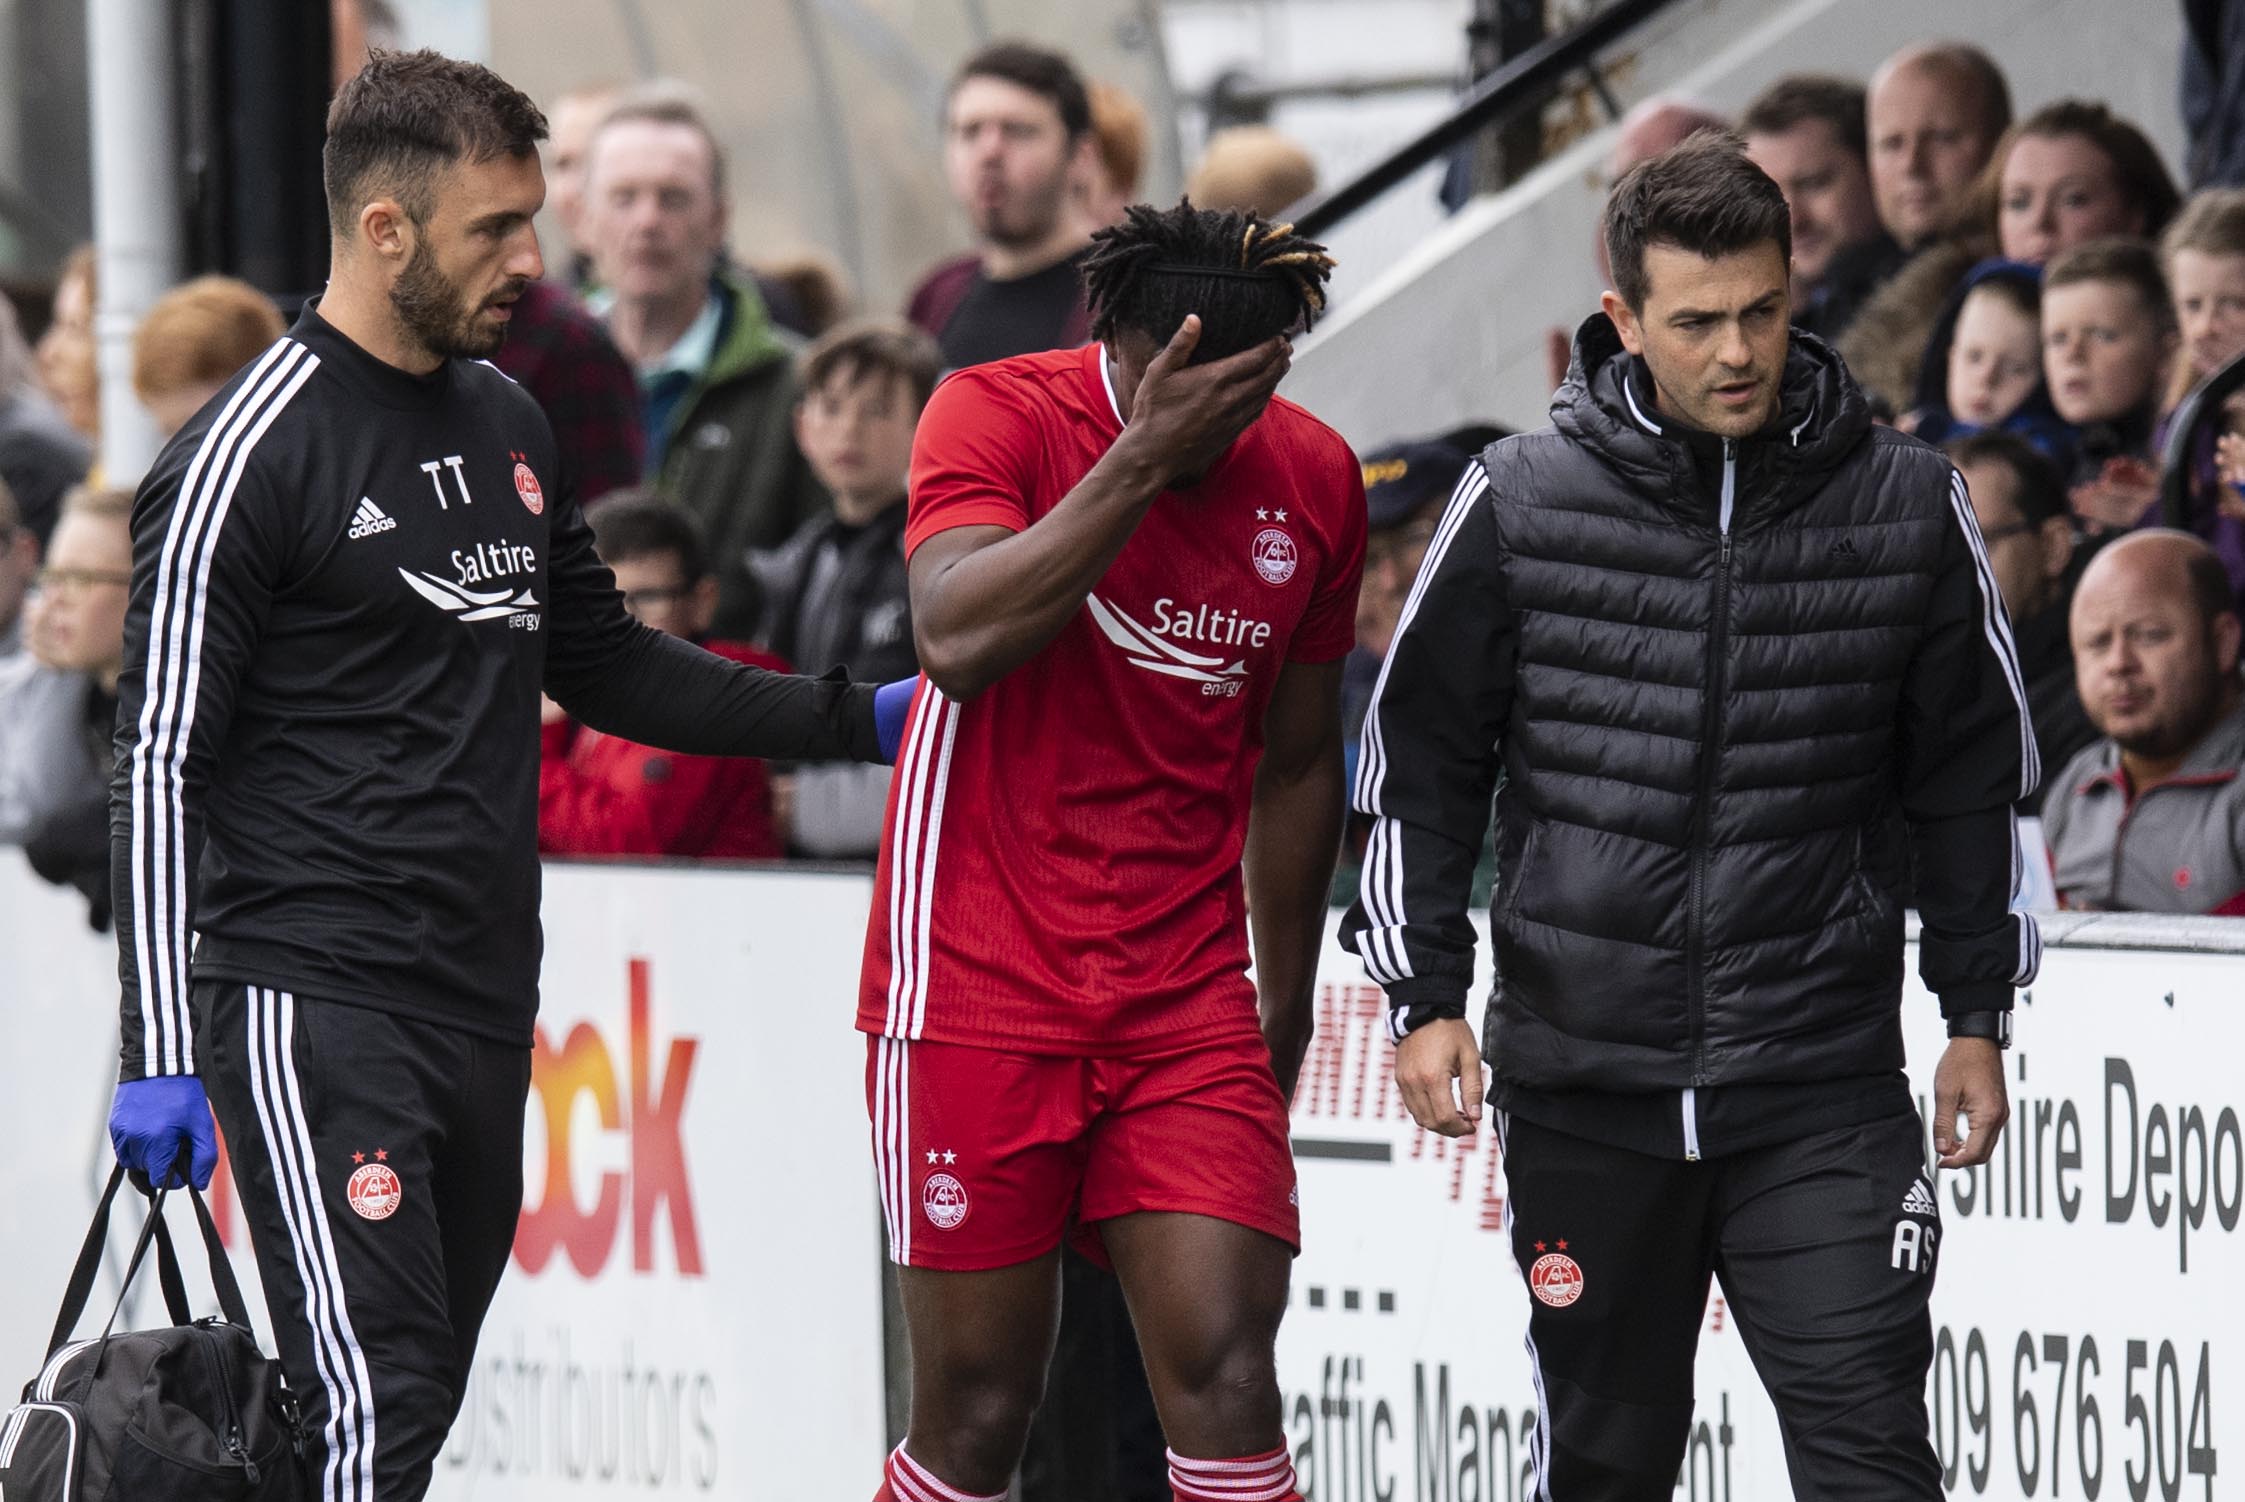 Aberdeen's Greg Leigh is only just returning from an ankle injury.